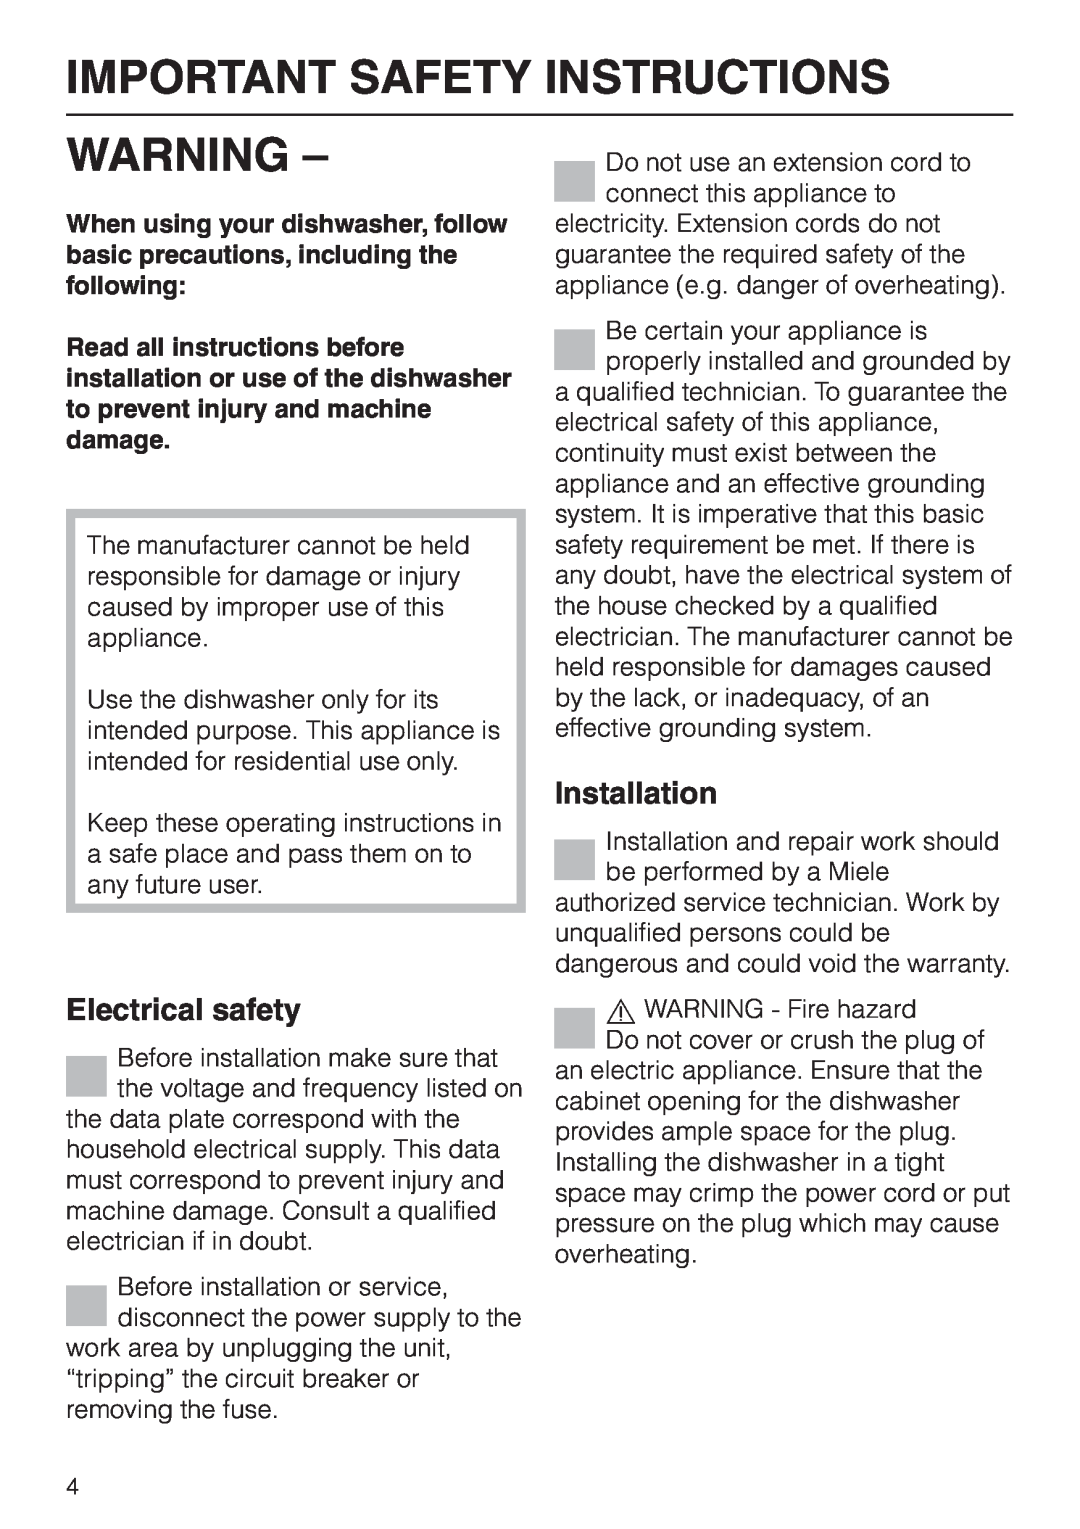 Miele Incognito manual Important Safety Instructions, Warning, Electrical safety, Installation 